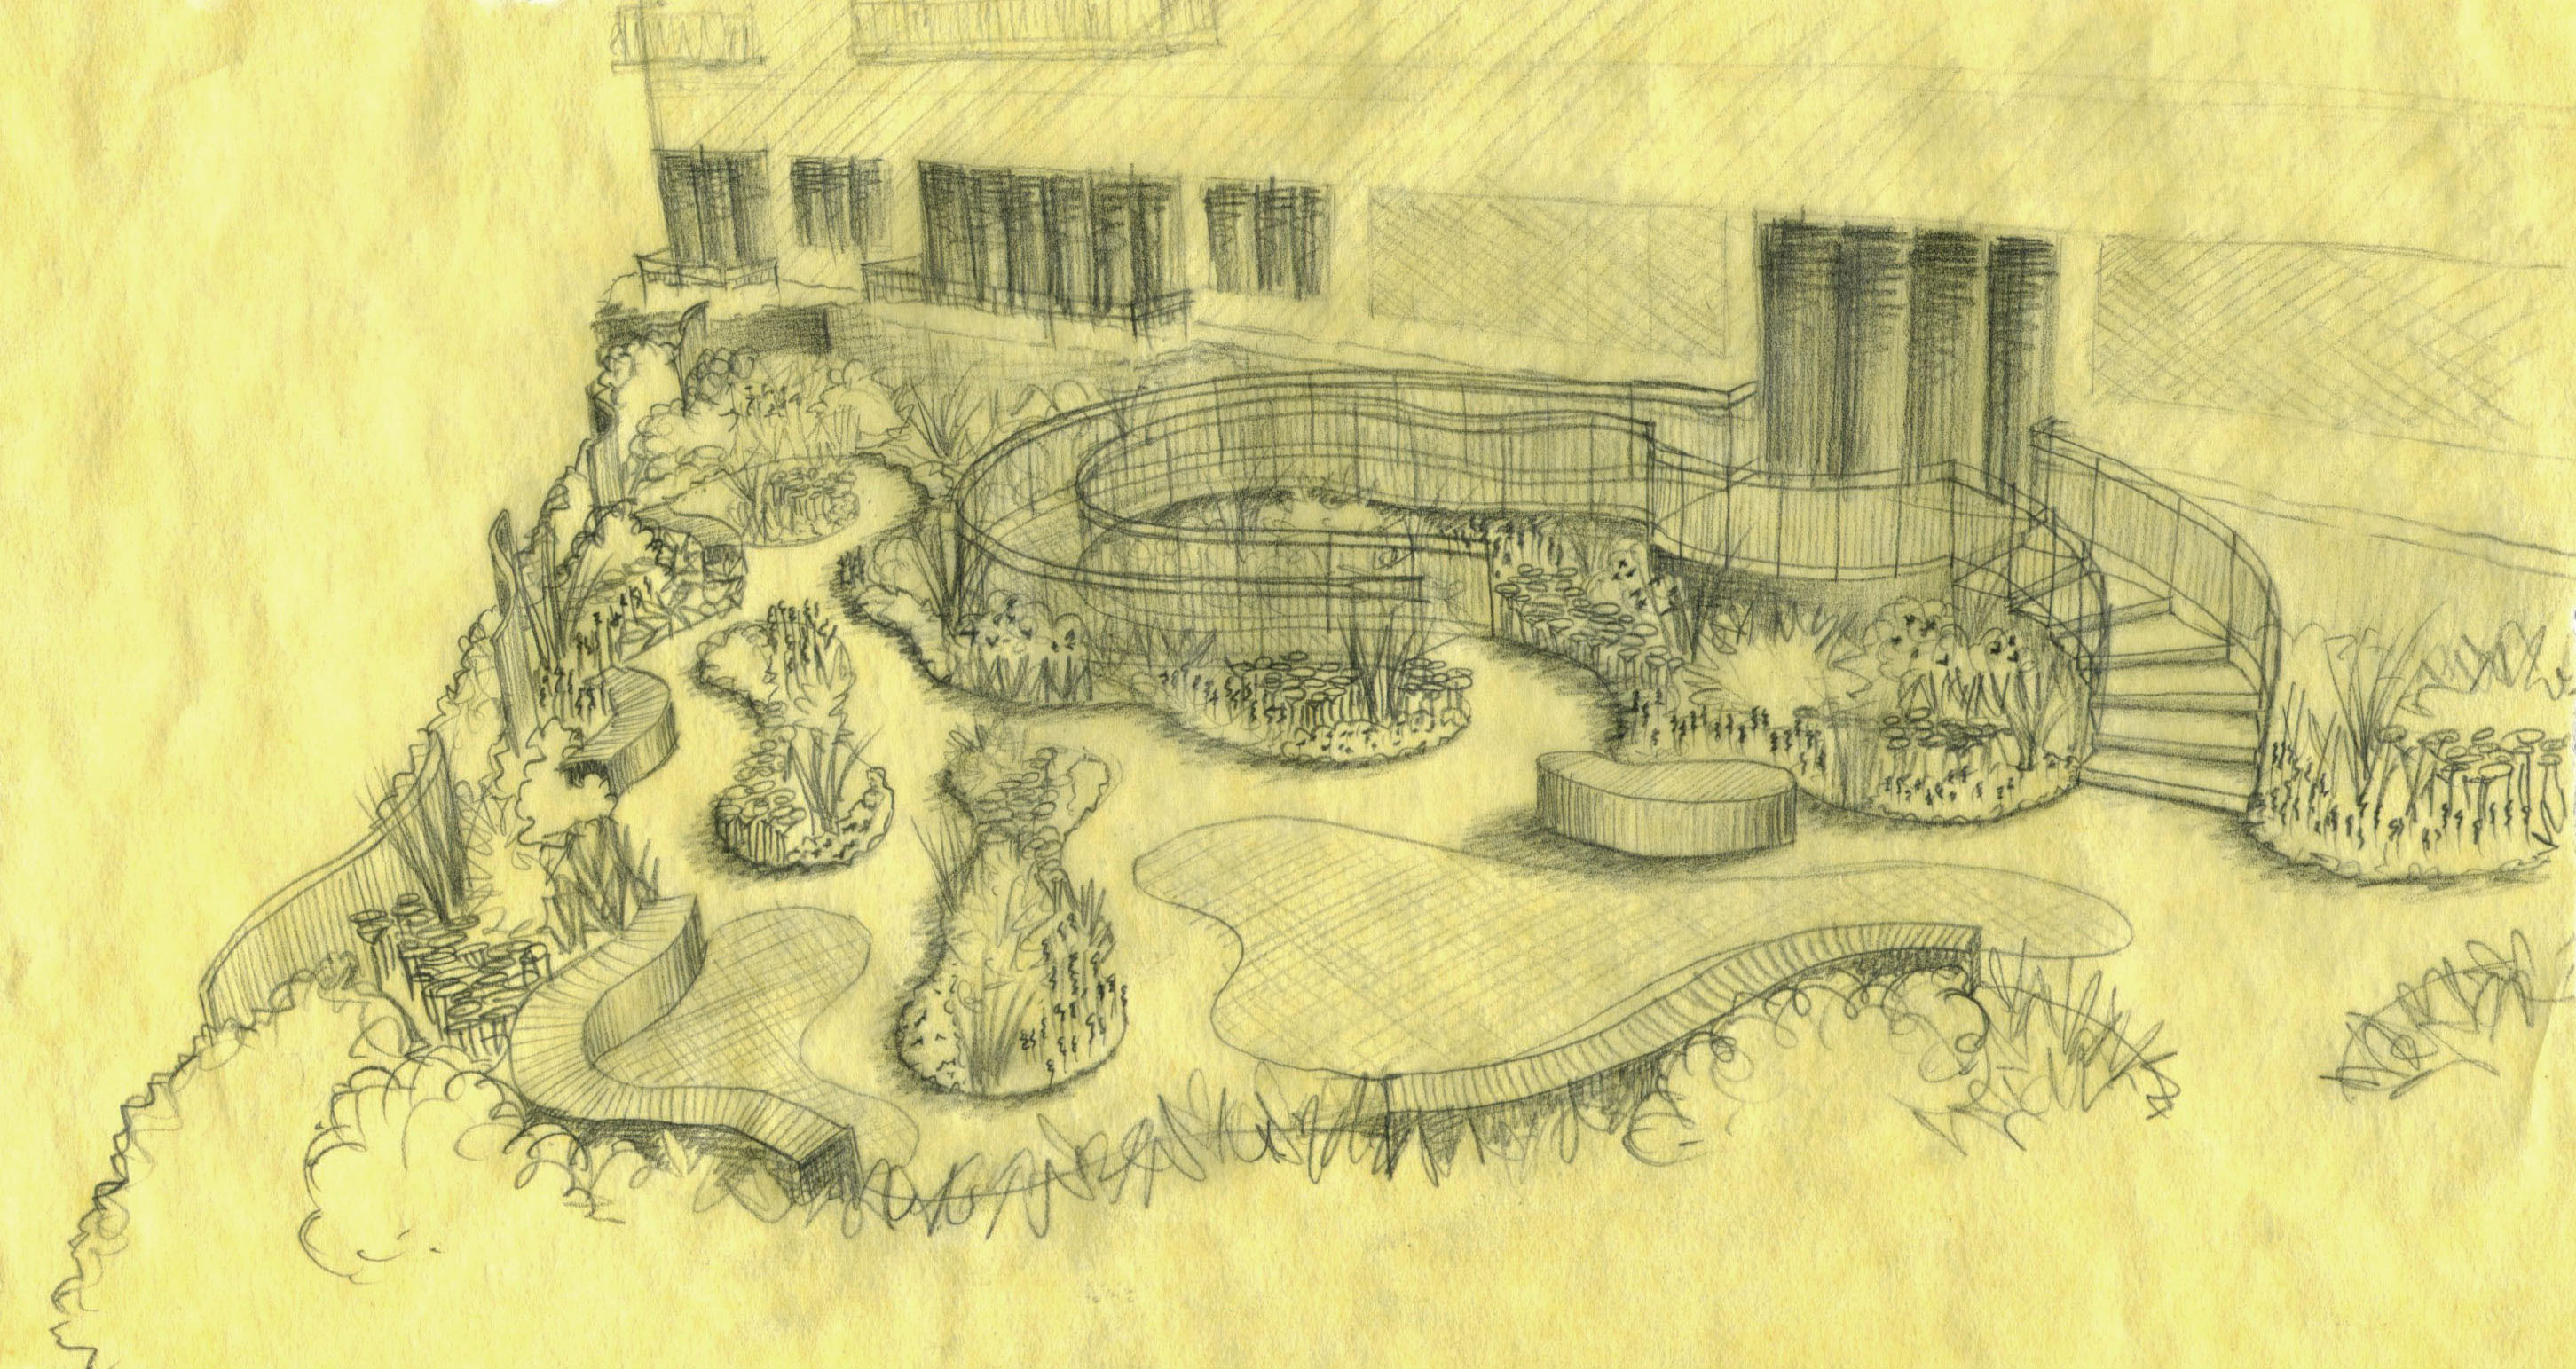 Perspective sketch for the Southgate project designed by Melbourne landscape design company Ian Barker Gardens